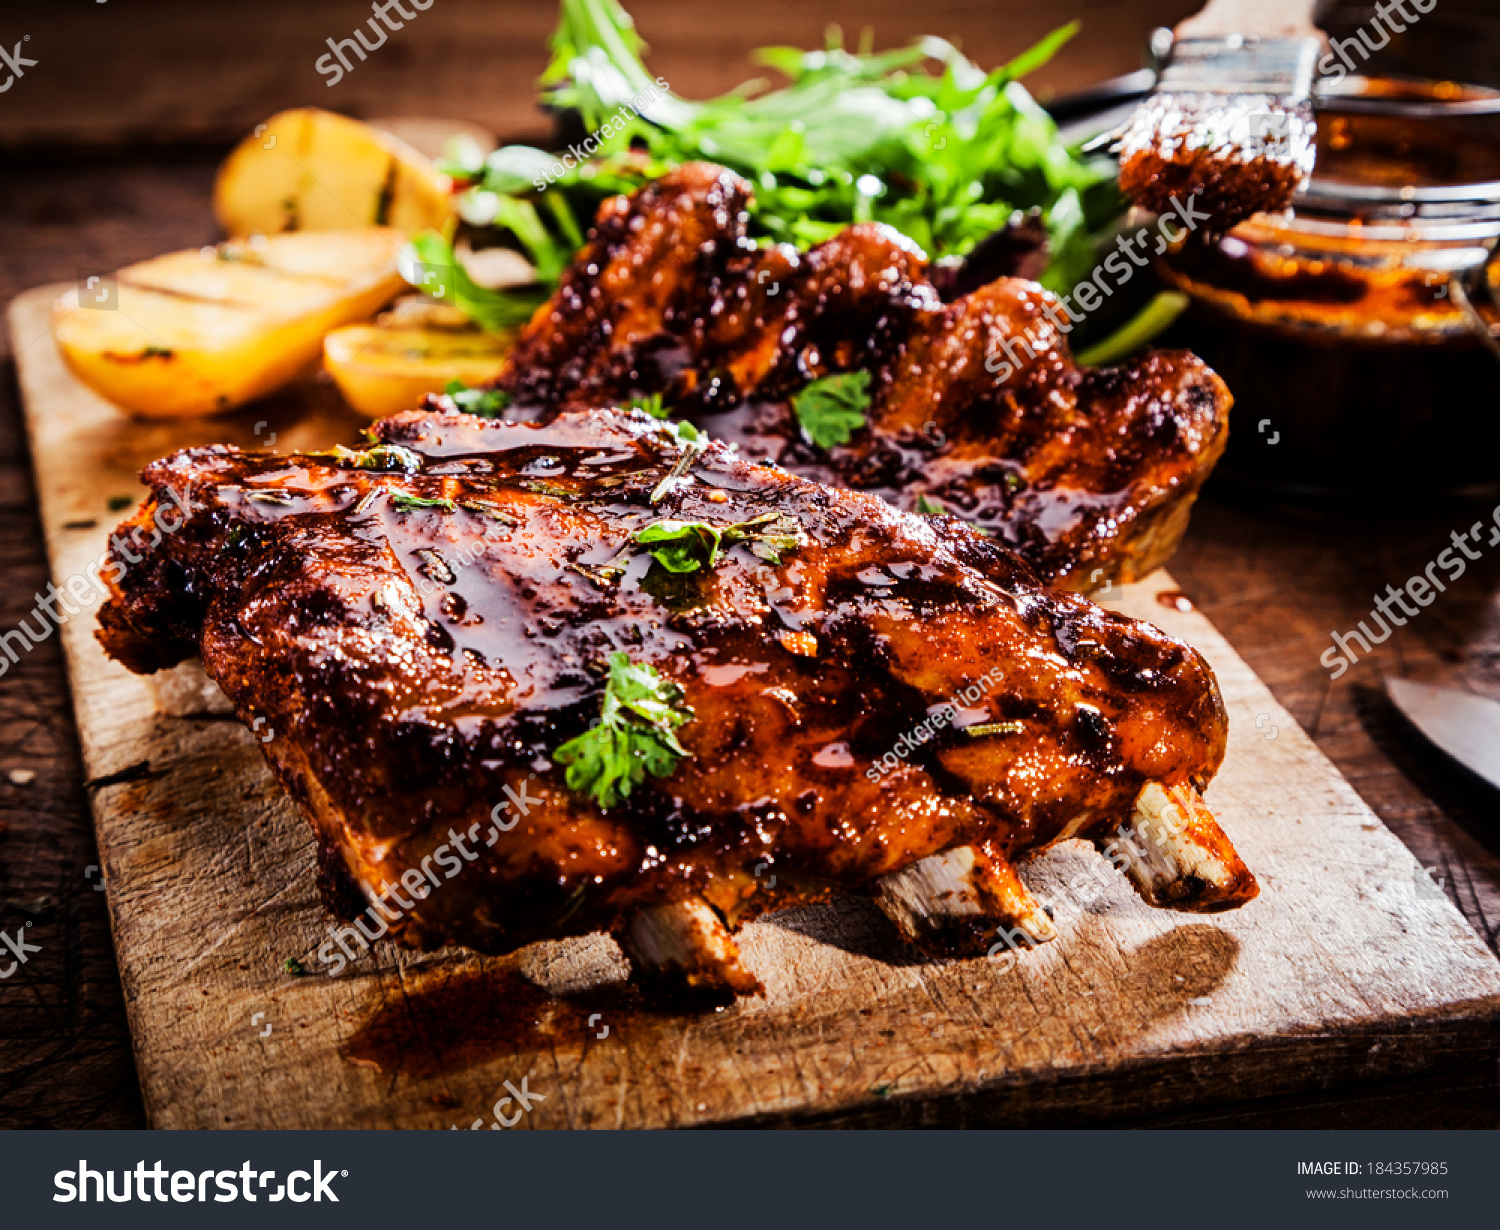 Delicious barbecued ribs seasoned with a spicy basting sauce and served with chopped fresh herbs on an old rustic wooden chopping board in a country kitchen #184357985